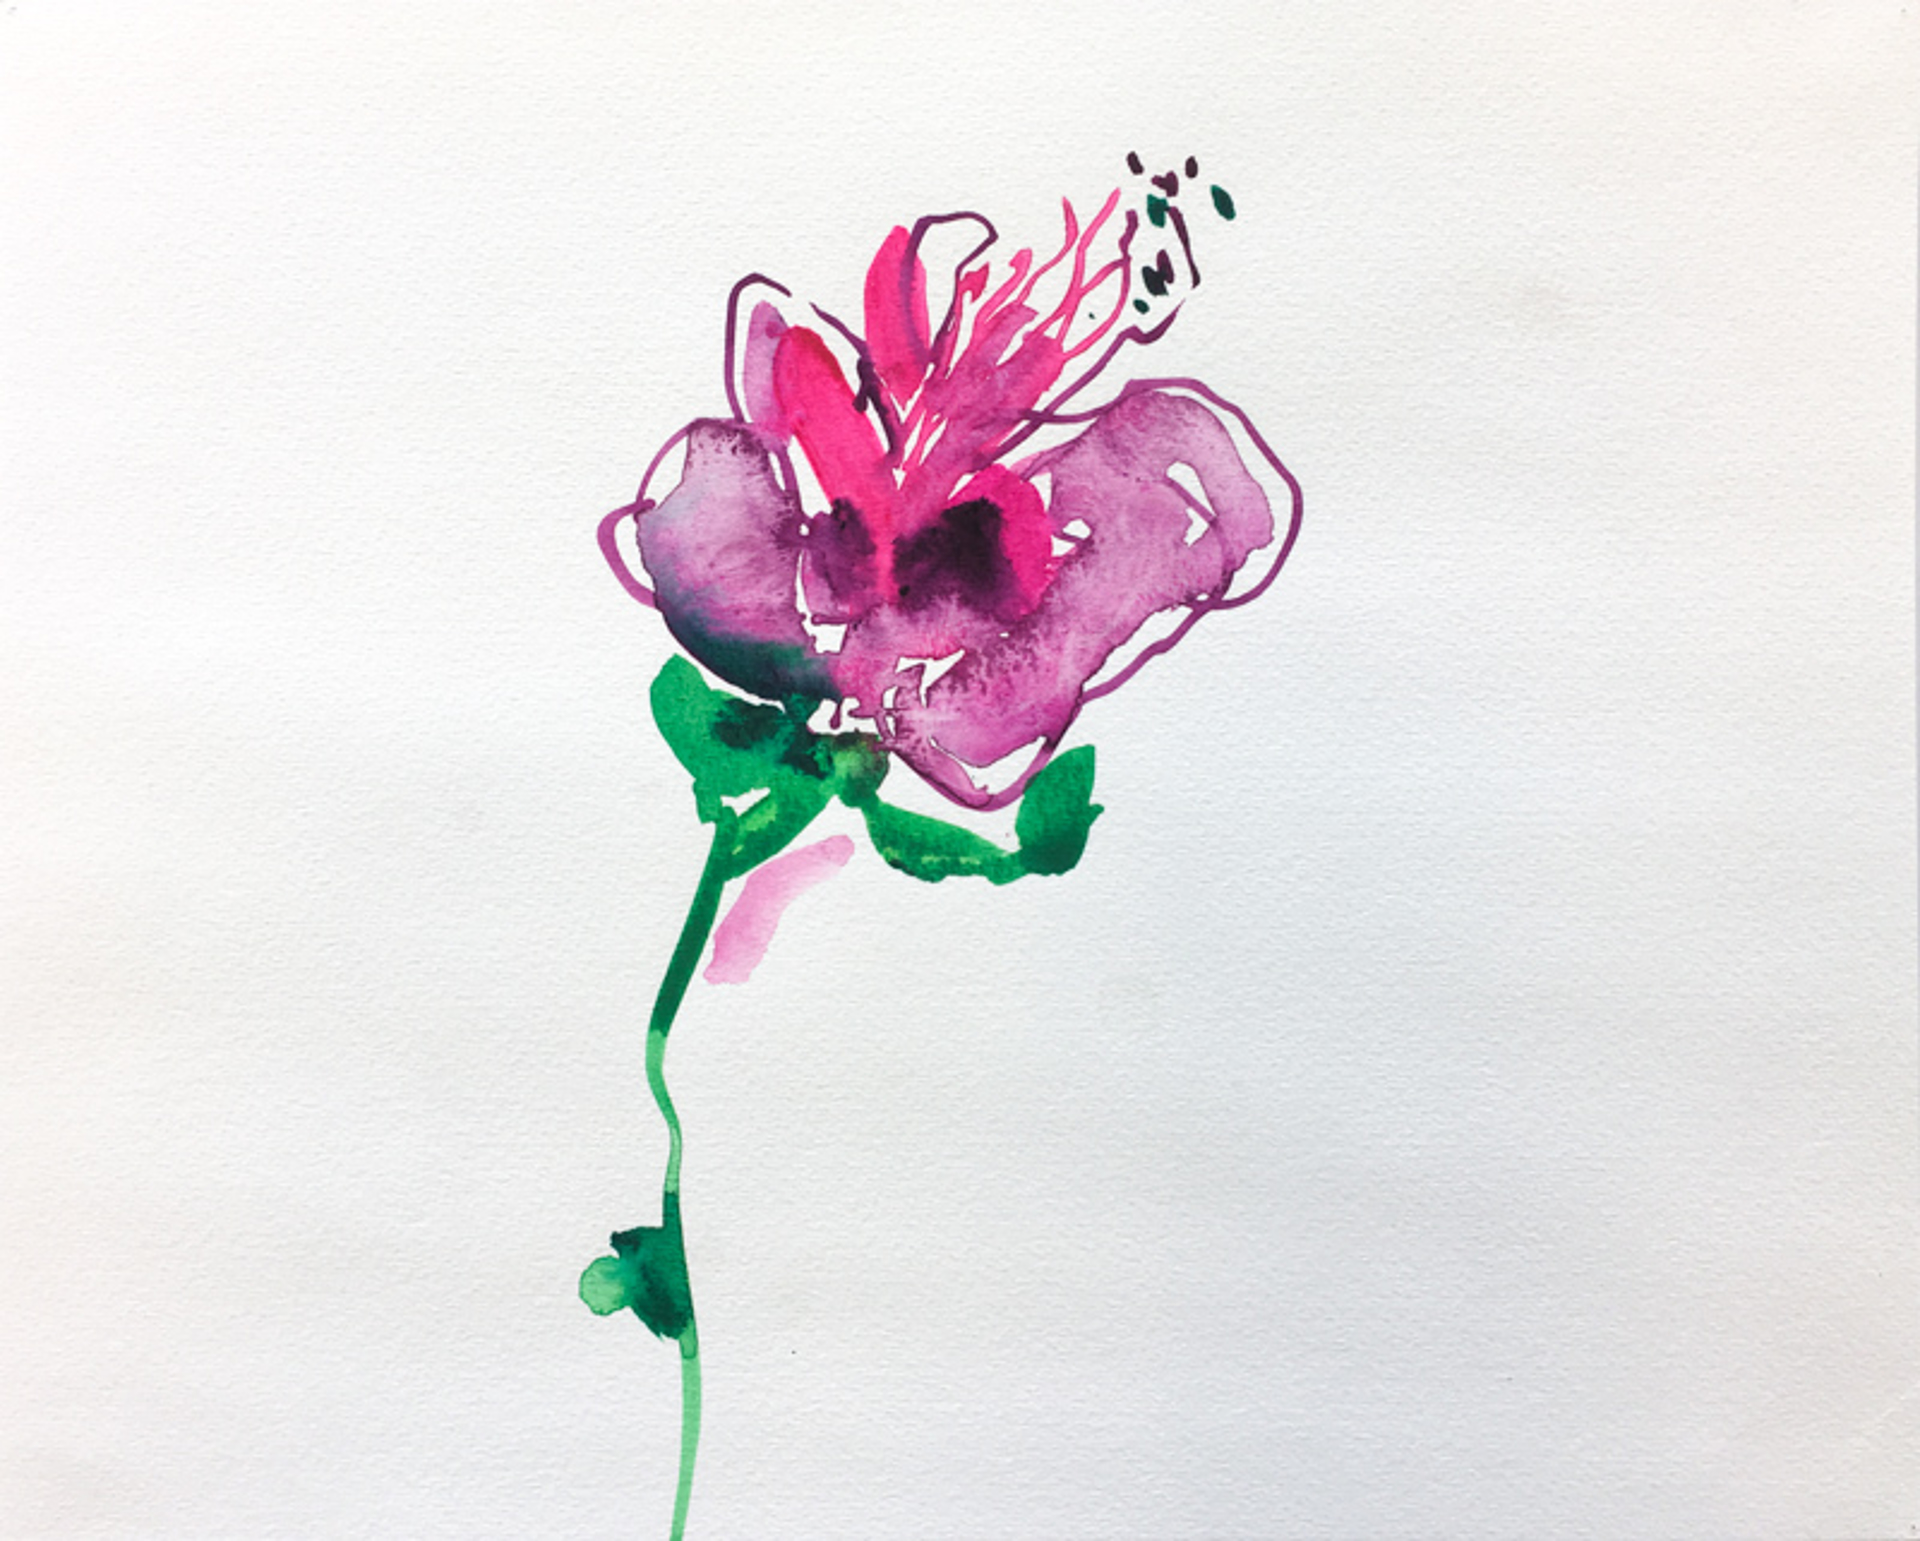 Floral Watercolor No. 1 by Christian Rothmann